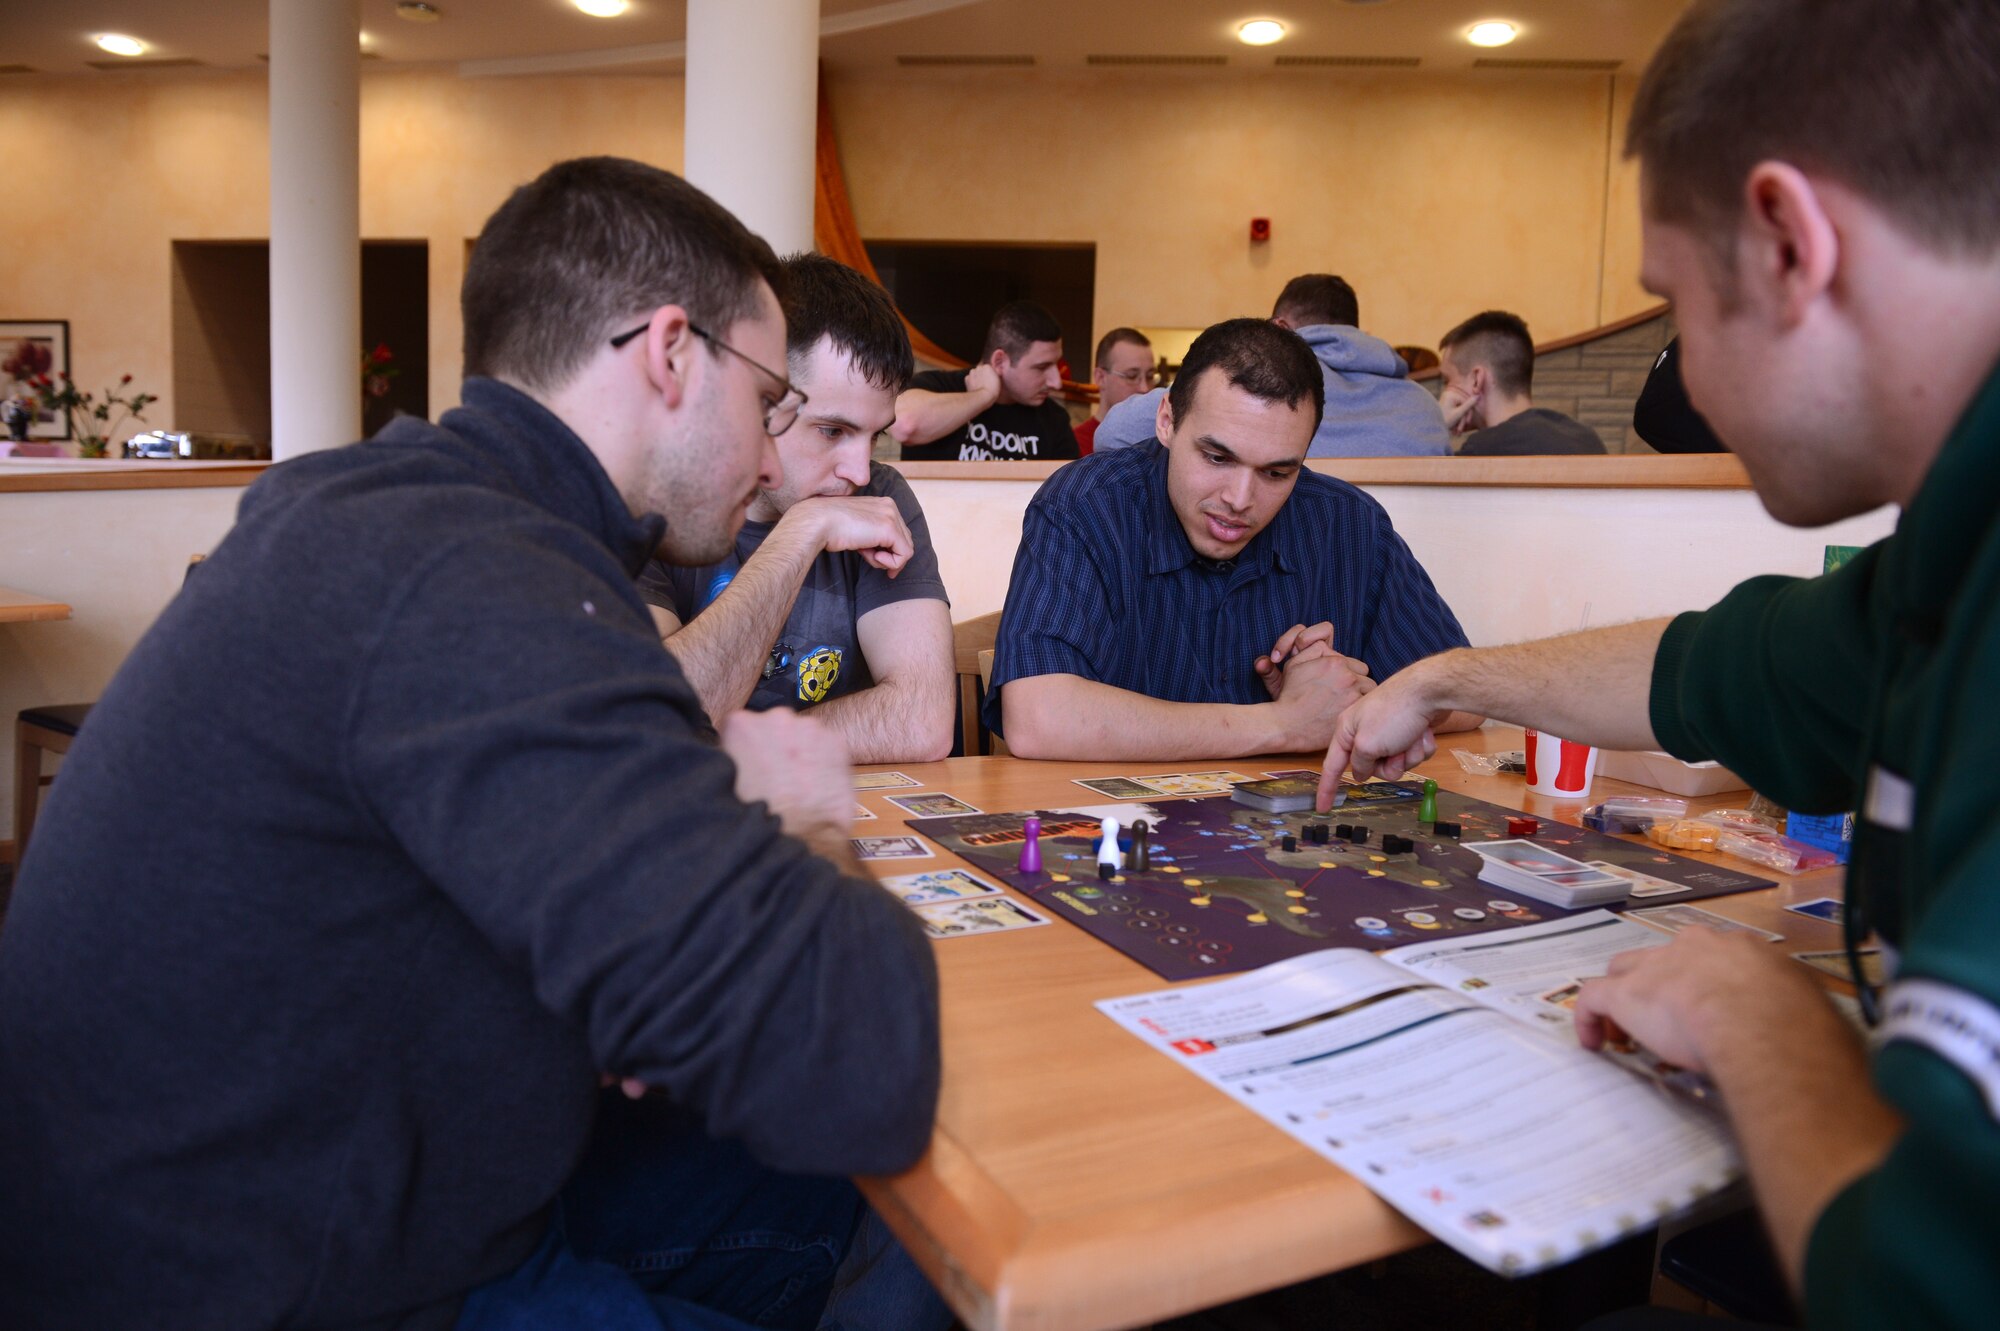 SPANGDAHLEM AIR BASE, Germany – U.S. Air Force Airmen play Pandemic together at Club Eifel April 6, 2013. This table-top gaming night is hosted by the 52nd Force Support Squadron for new and experienced gaming enthusiasts. (U.S. Air Force photo by Airman 1st Class Kyle Gese/Released)